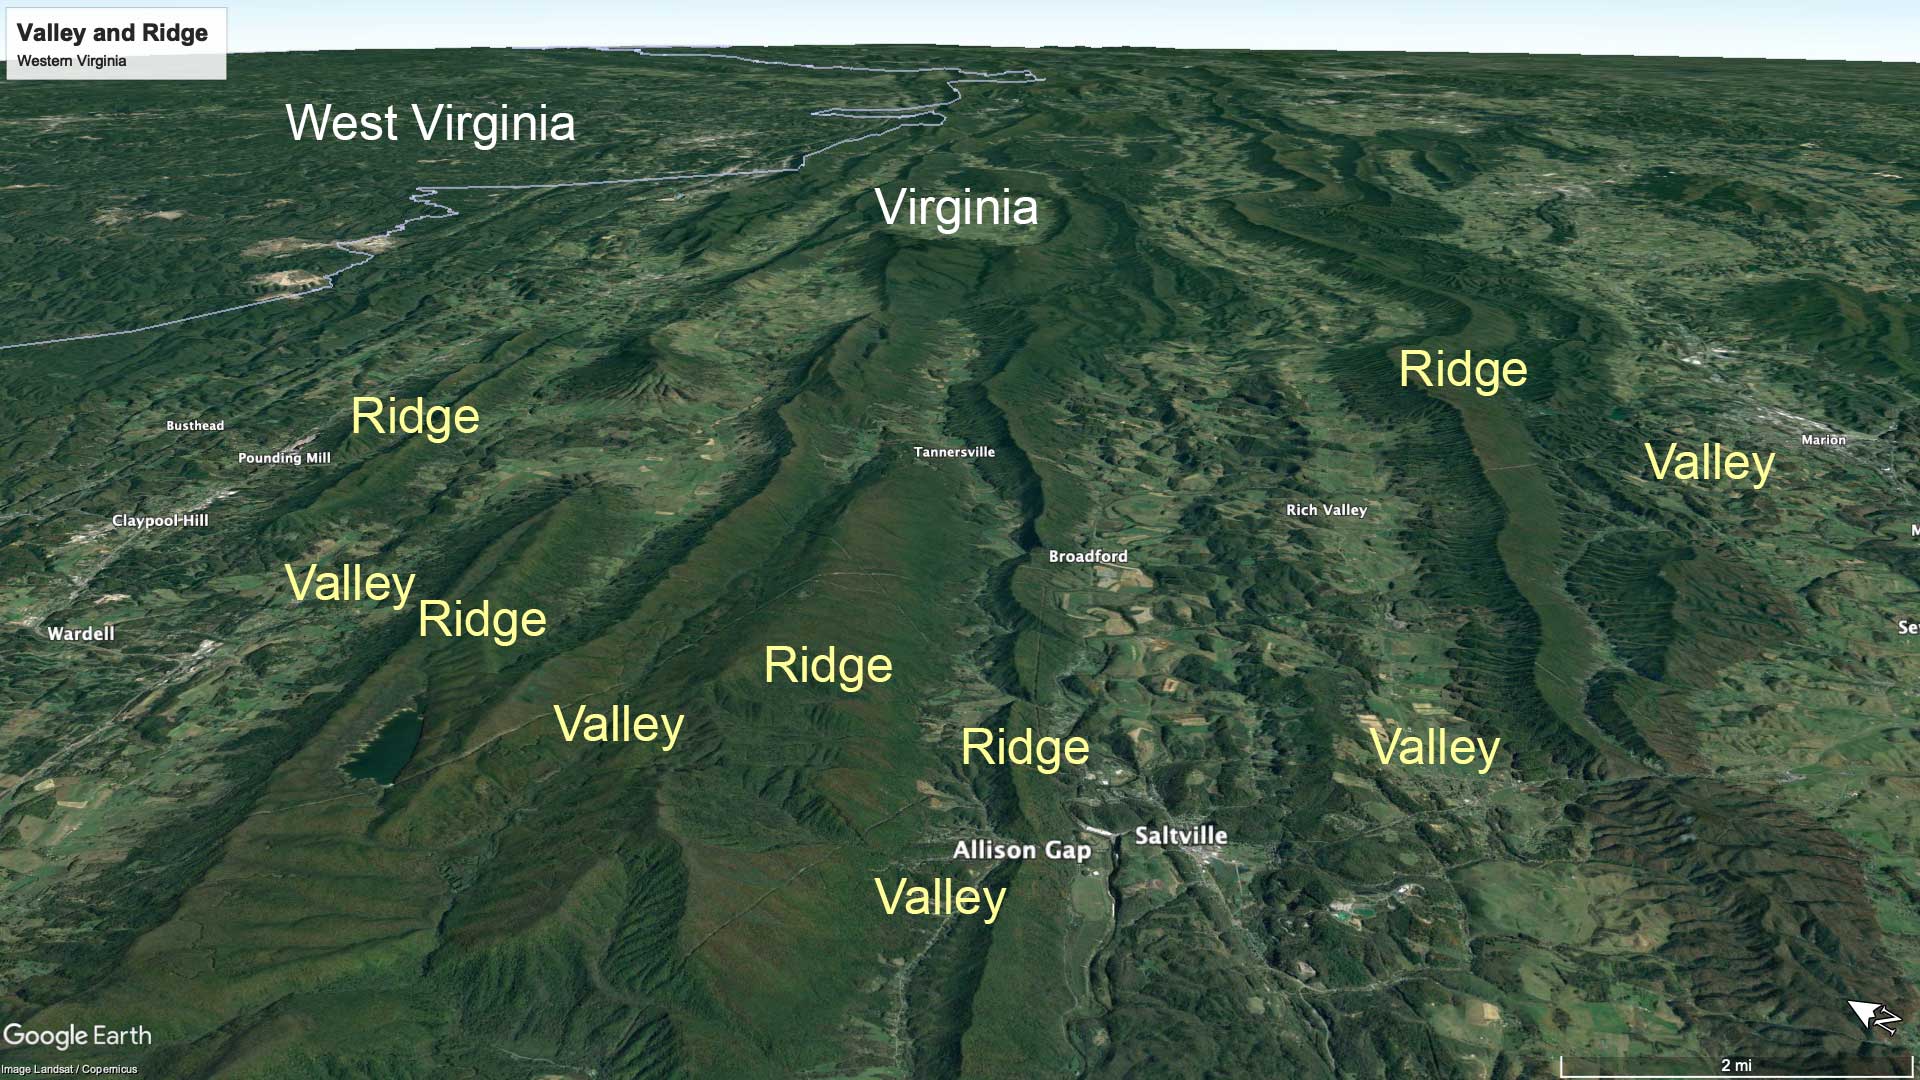 Map showing the Valley and Ridge system in western Virginia.